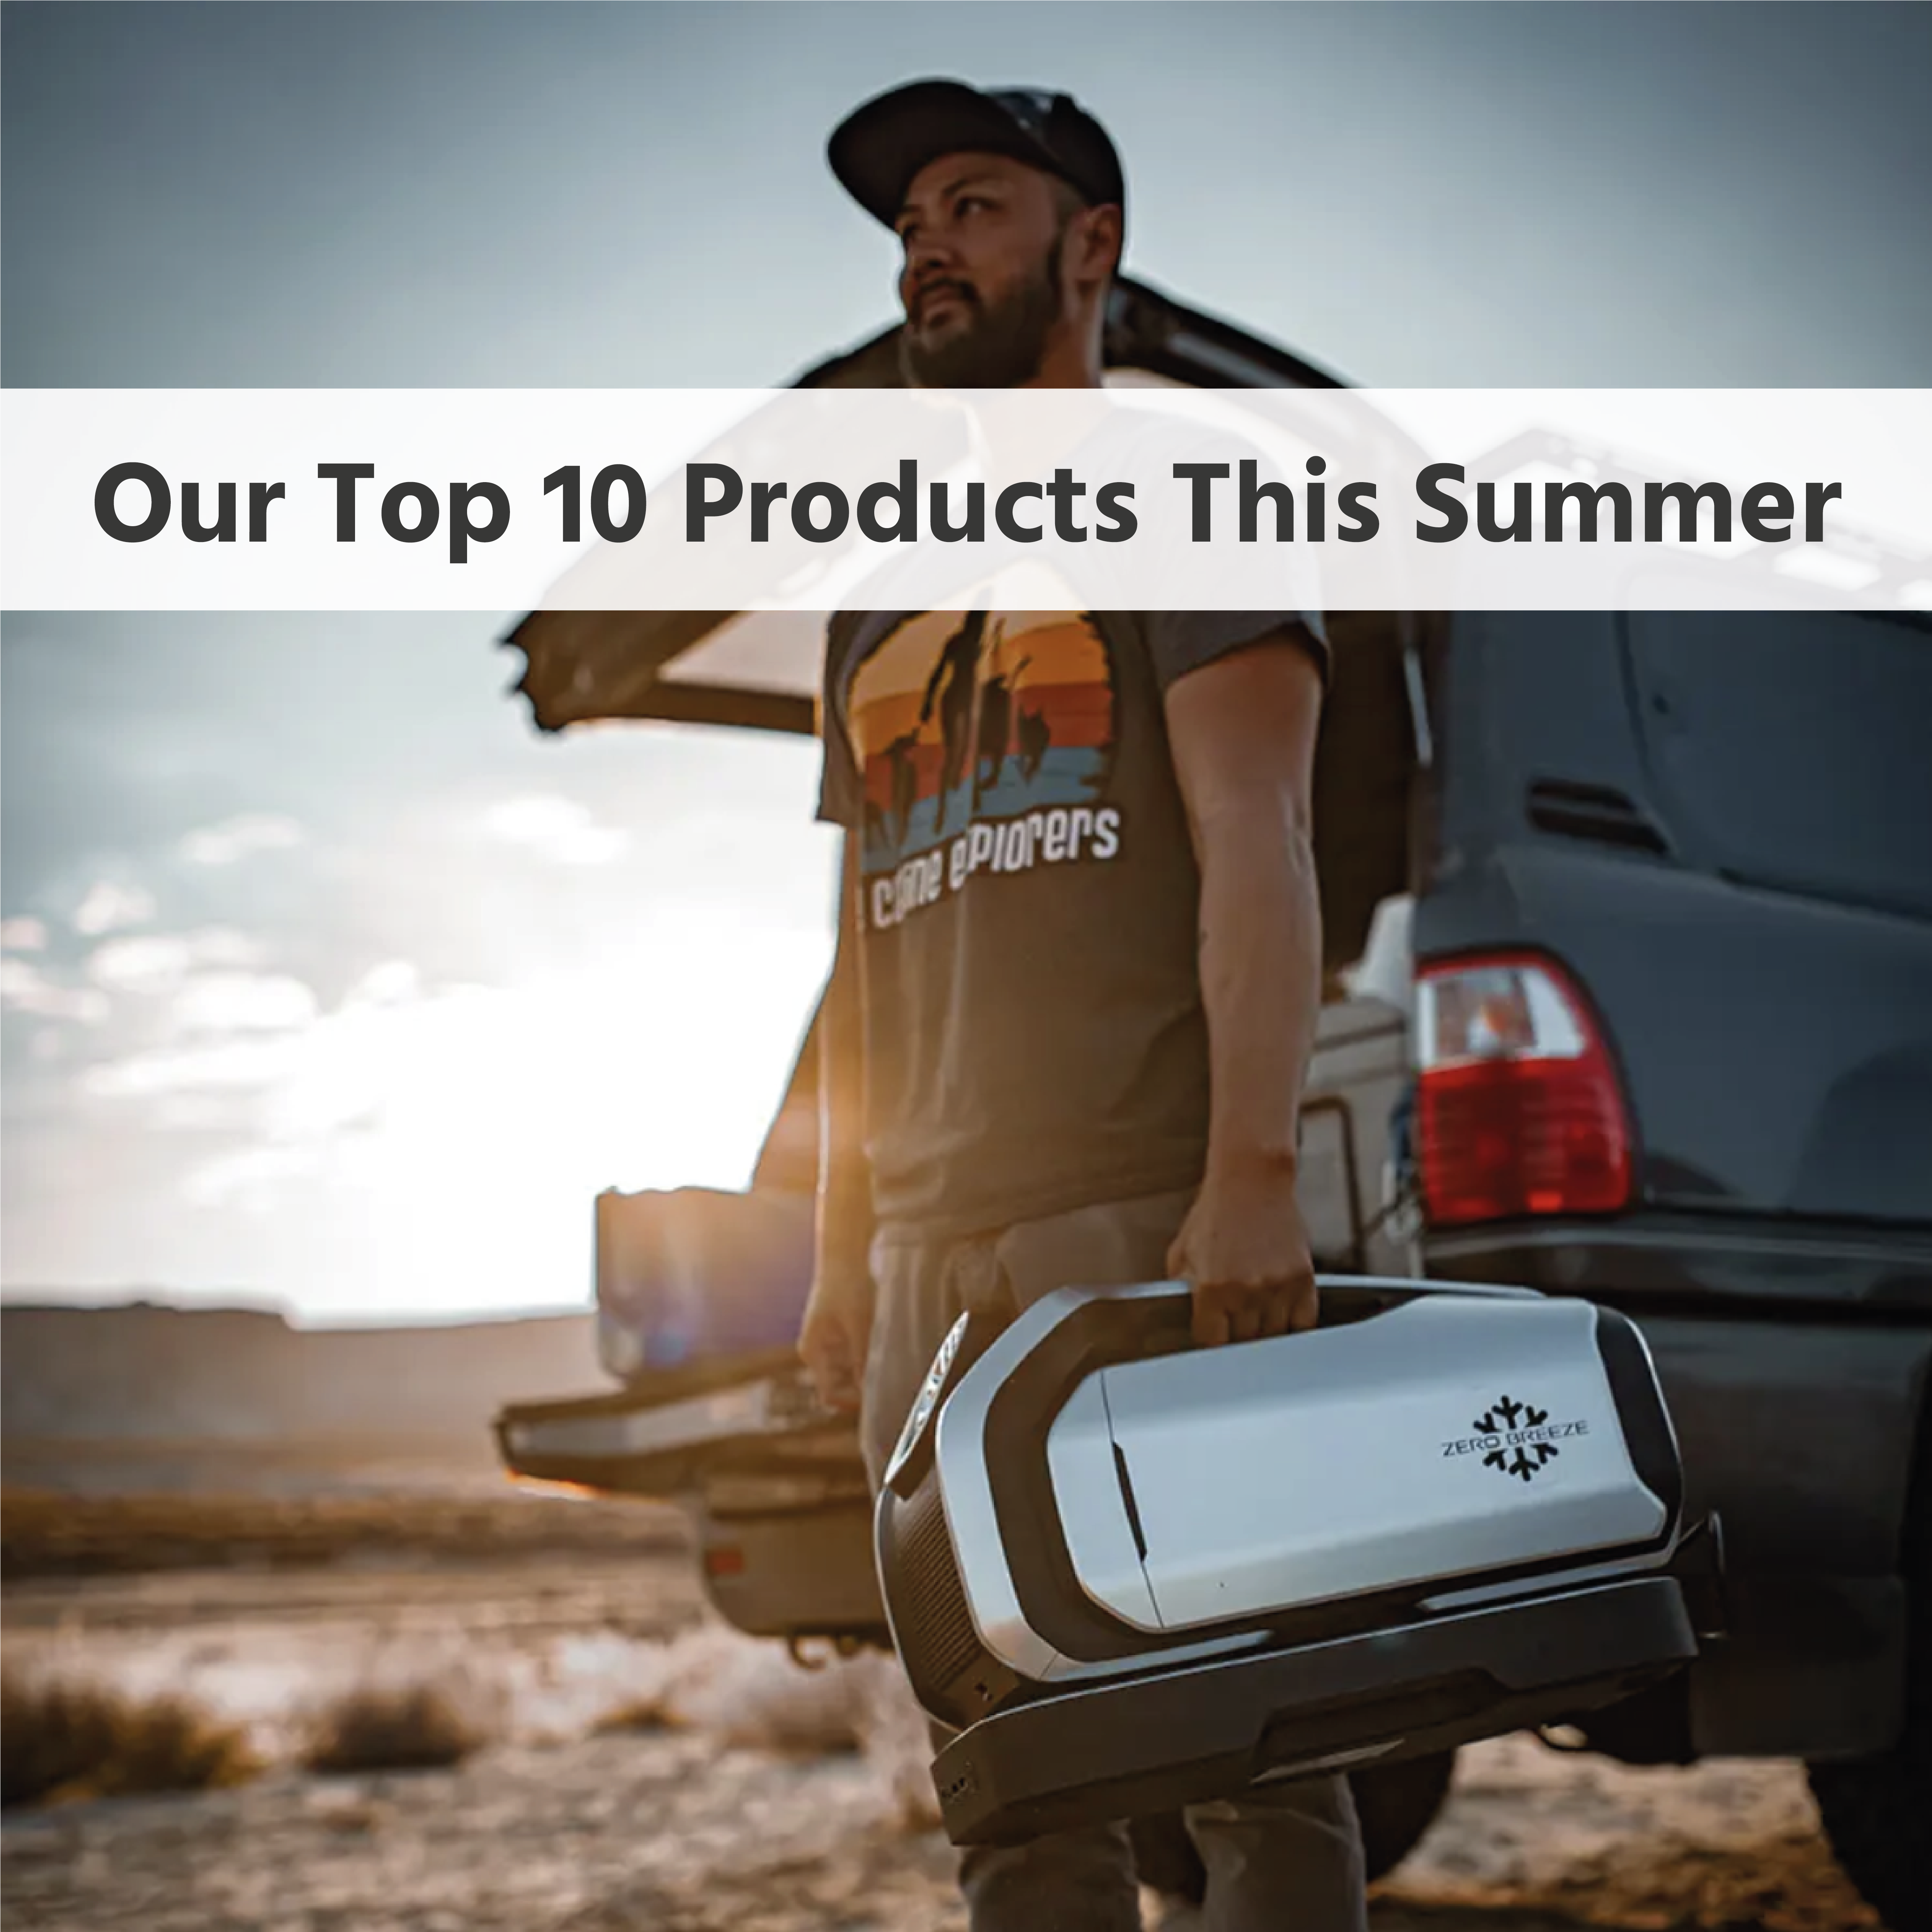 Our Top 10 Products Reccomendations For This Summer!